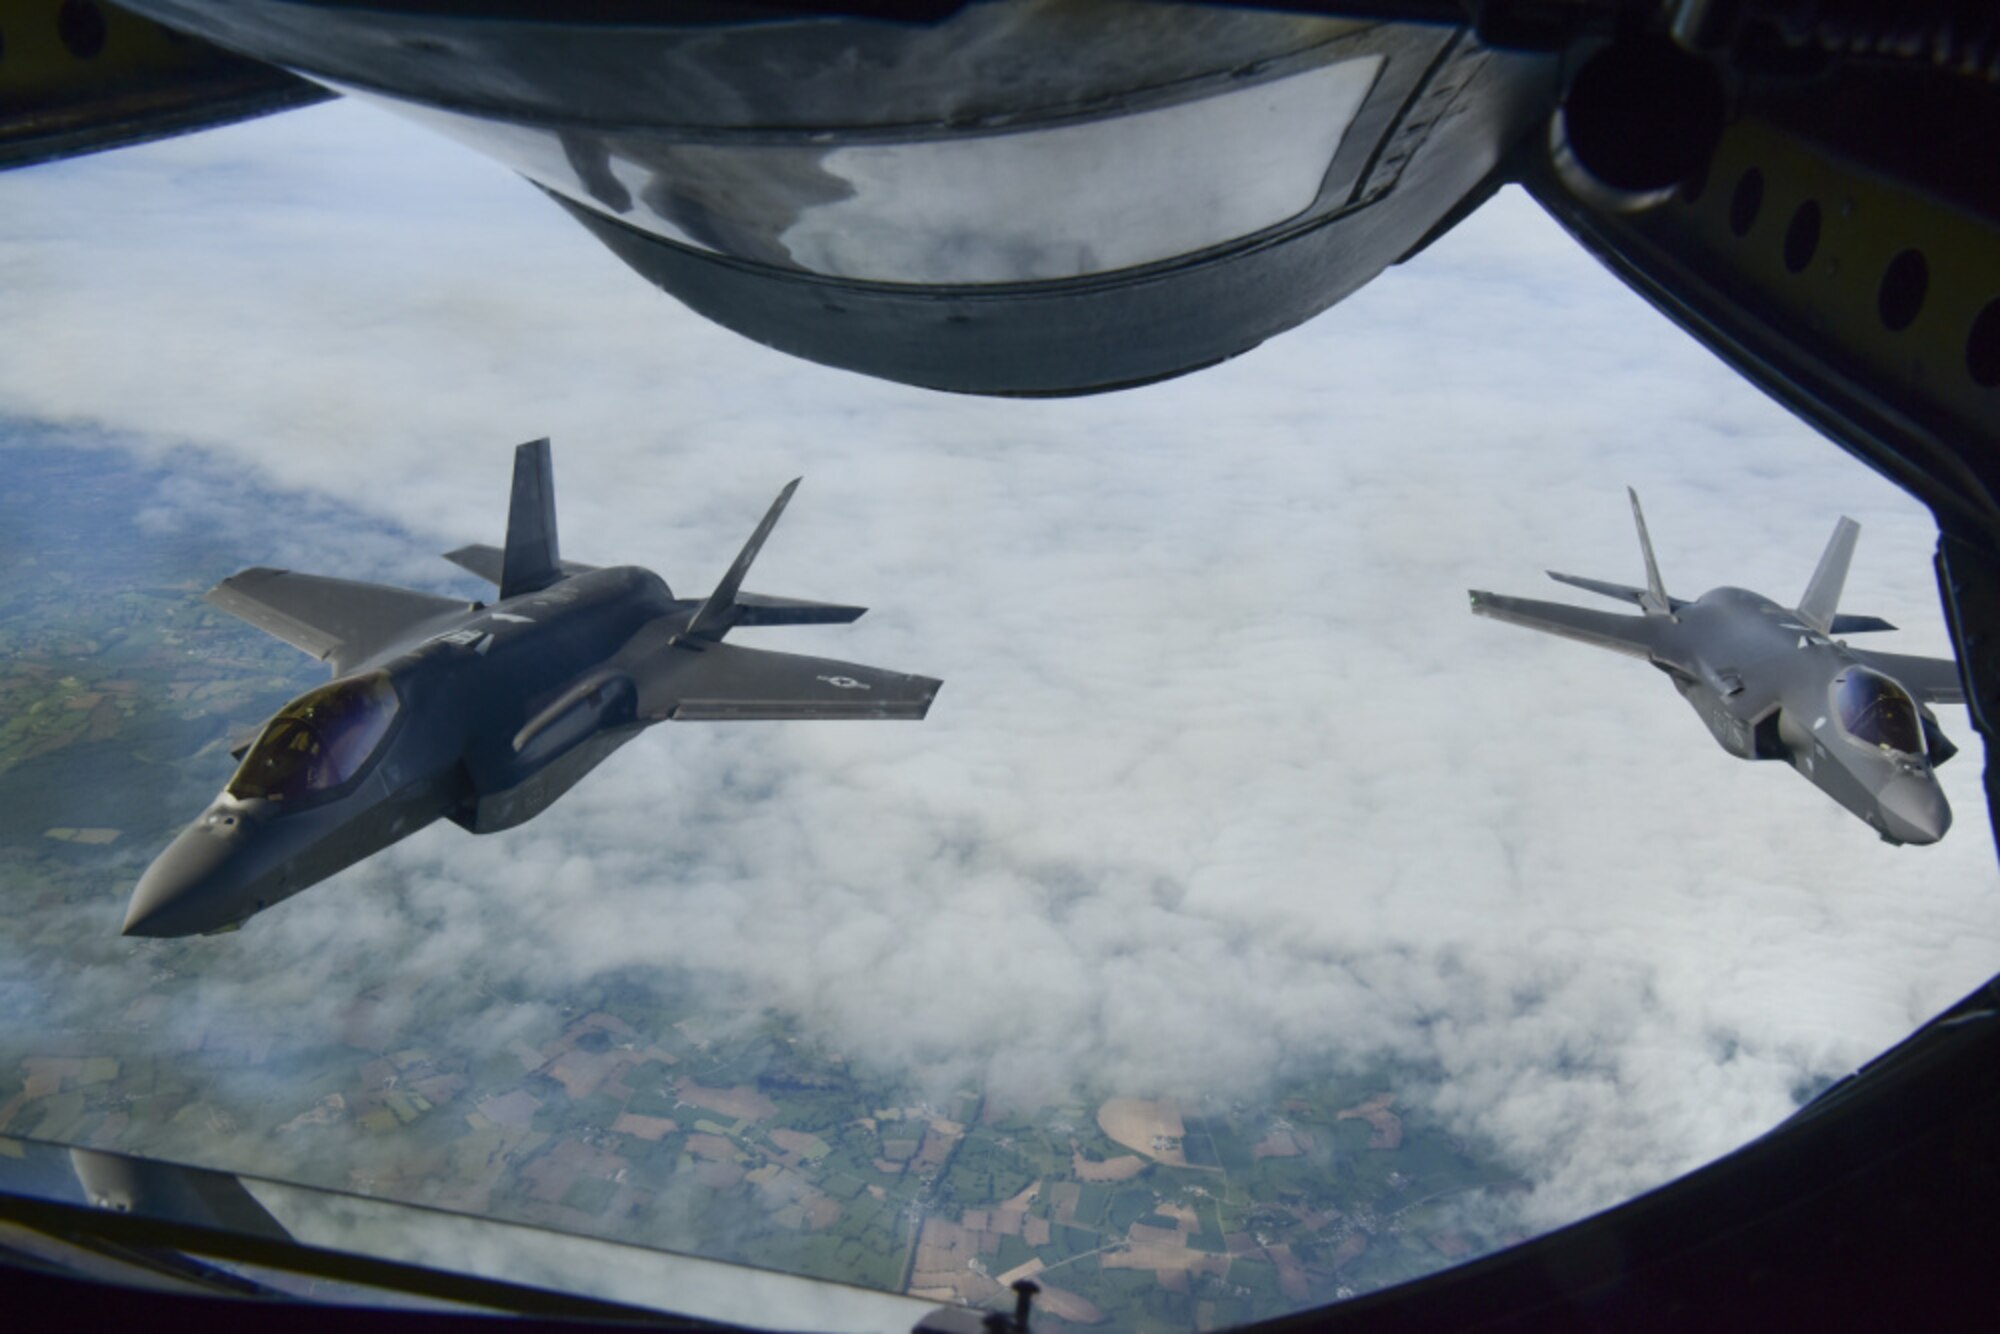 Two U.S. Air Force F-35A Lightning II aircraft assigned to the 4th Fighter Squadron, Hill Air Force Base, Utah, fly over France, May 30, 2021. The F-35A provides next-generation stealth, enhanced situational awareness, and reduced vulnerability for the United States and allied nations. (U.S. Air Force photo by Master Sgt. Darnell T. Cannady)